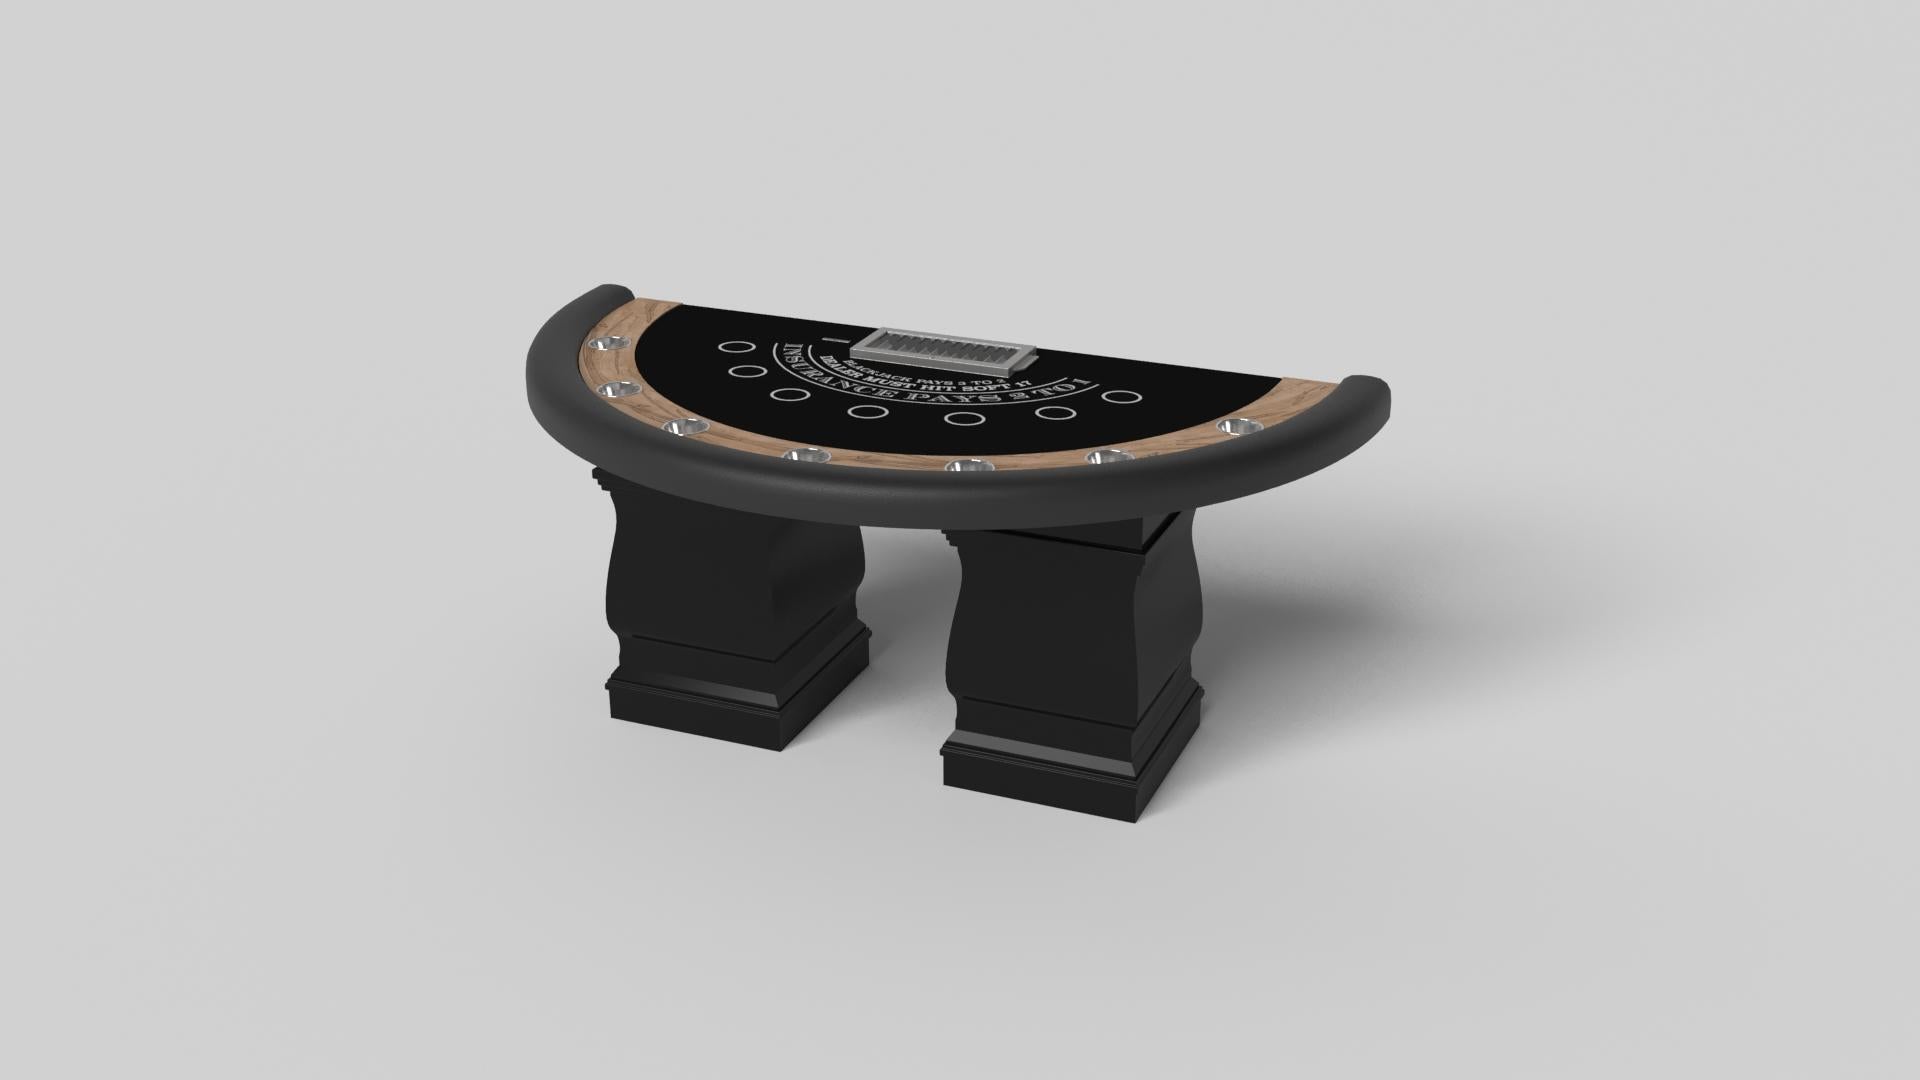 Two hand-sculpted legs bestow a sense of classic style upon the Baluster blackjack table in white. This luxury game table features a semicircular top perched upon two wide baluster column legs that mimic the curves and lines of crown molding. It’s a